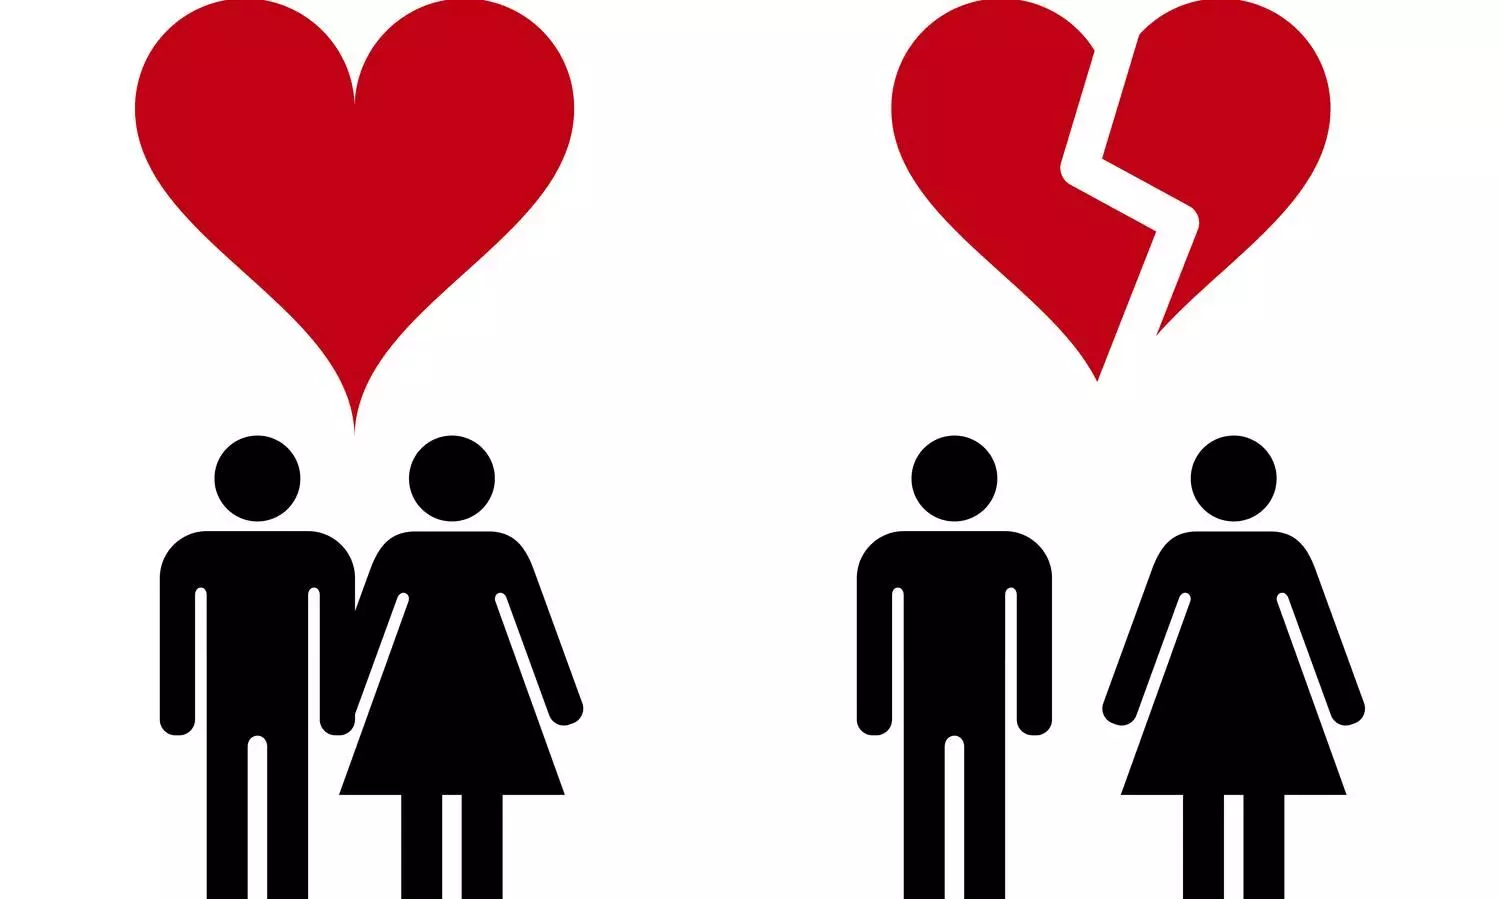 India boasts worlds lowest divorce rate according to Global Index